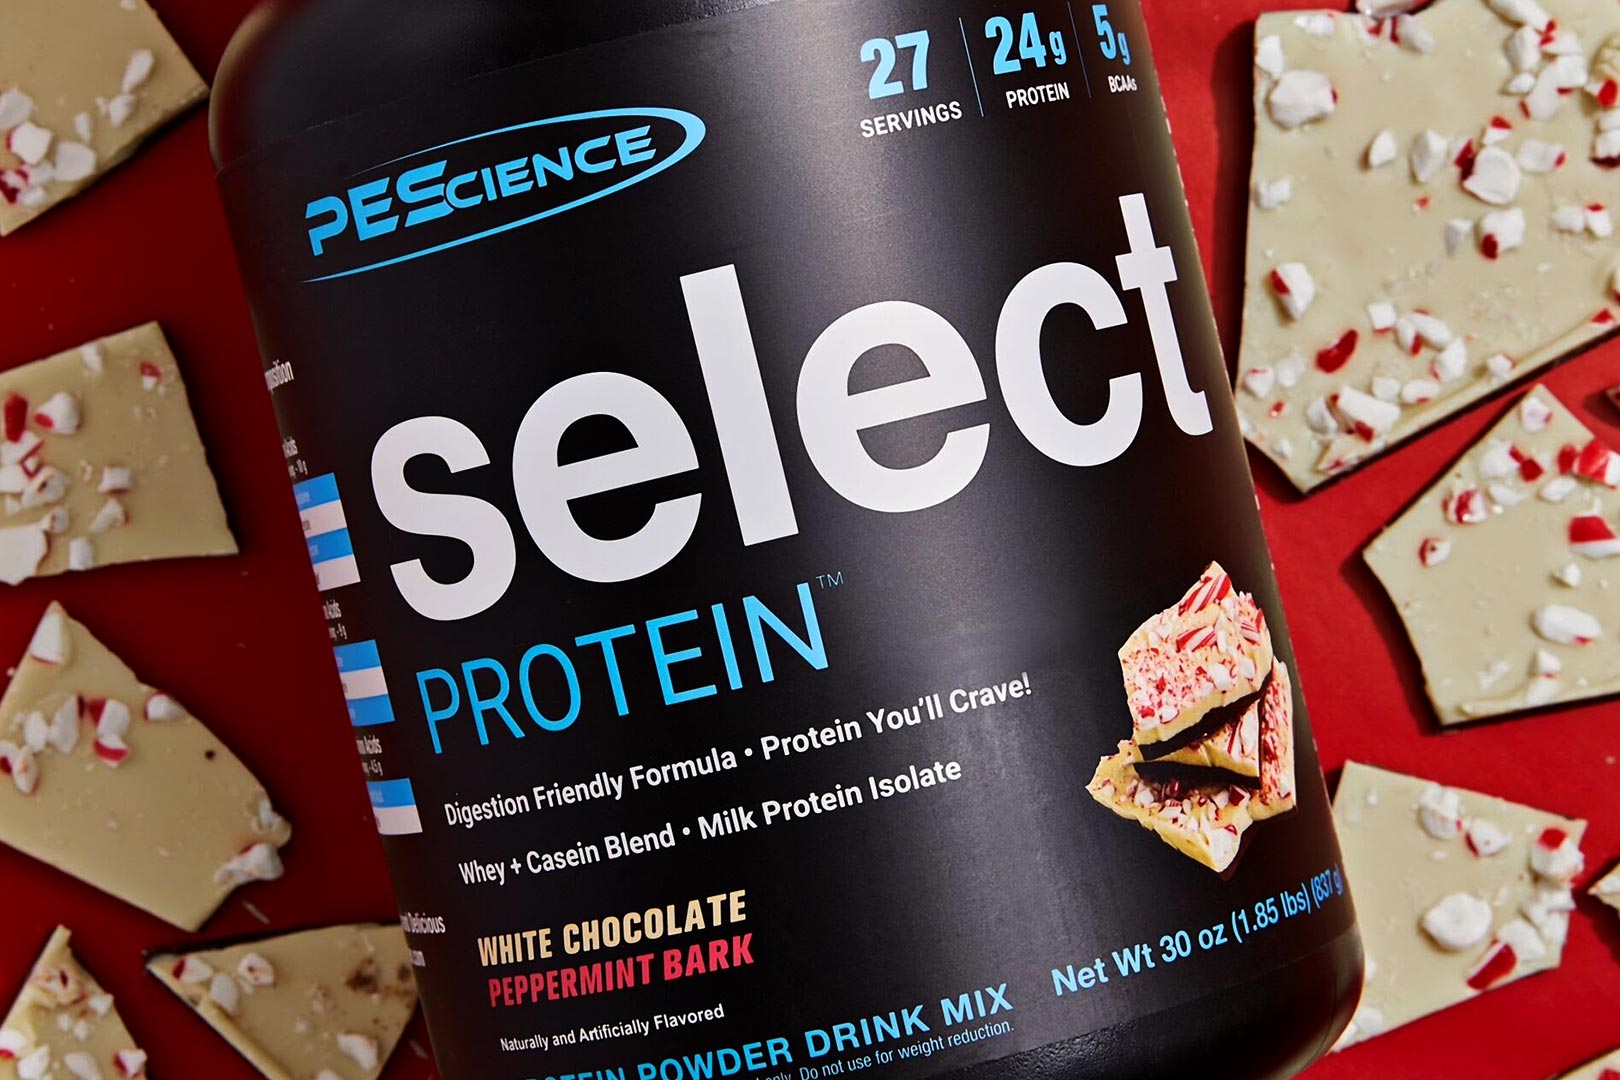 Pescience 2023 White Chocolate Peppermint Bark Select Protein